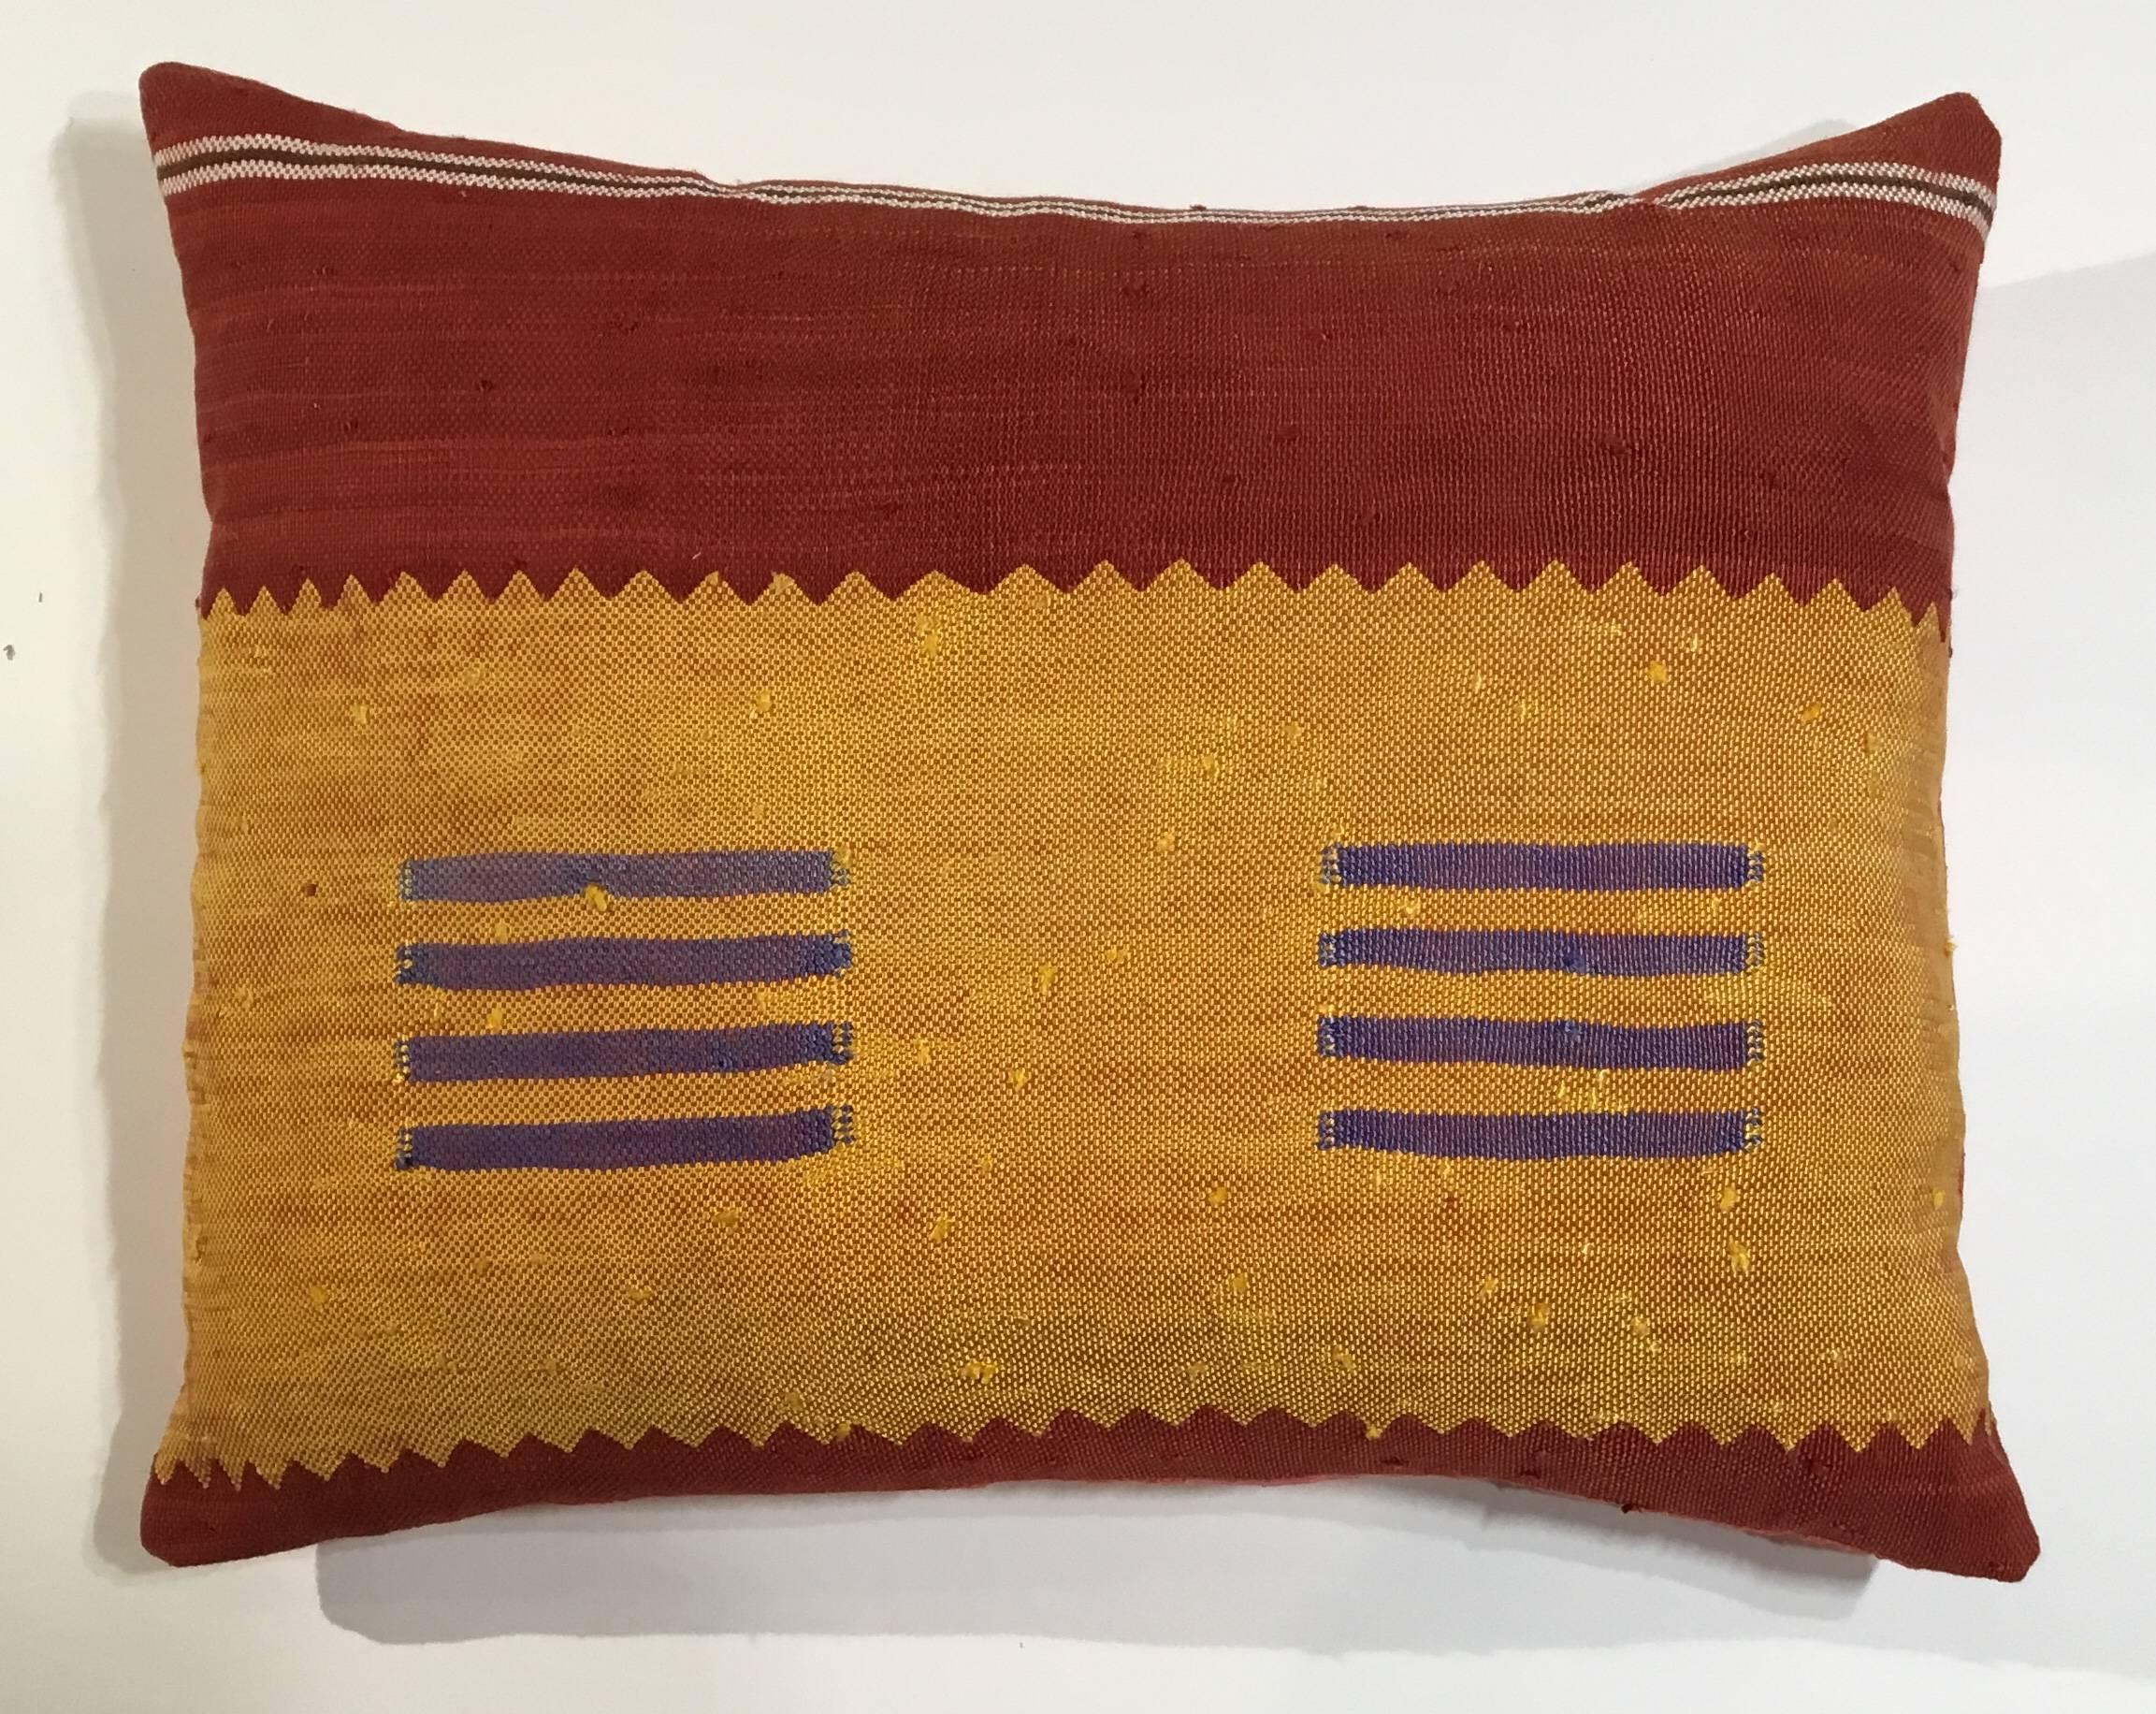 Beautiful pillow made of hand woven flat weave rug fragment, red muster, purple and white color with geometric motif, silk backing, fresh insert.